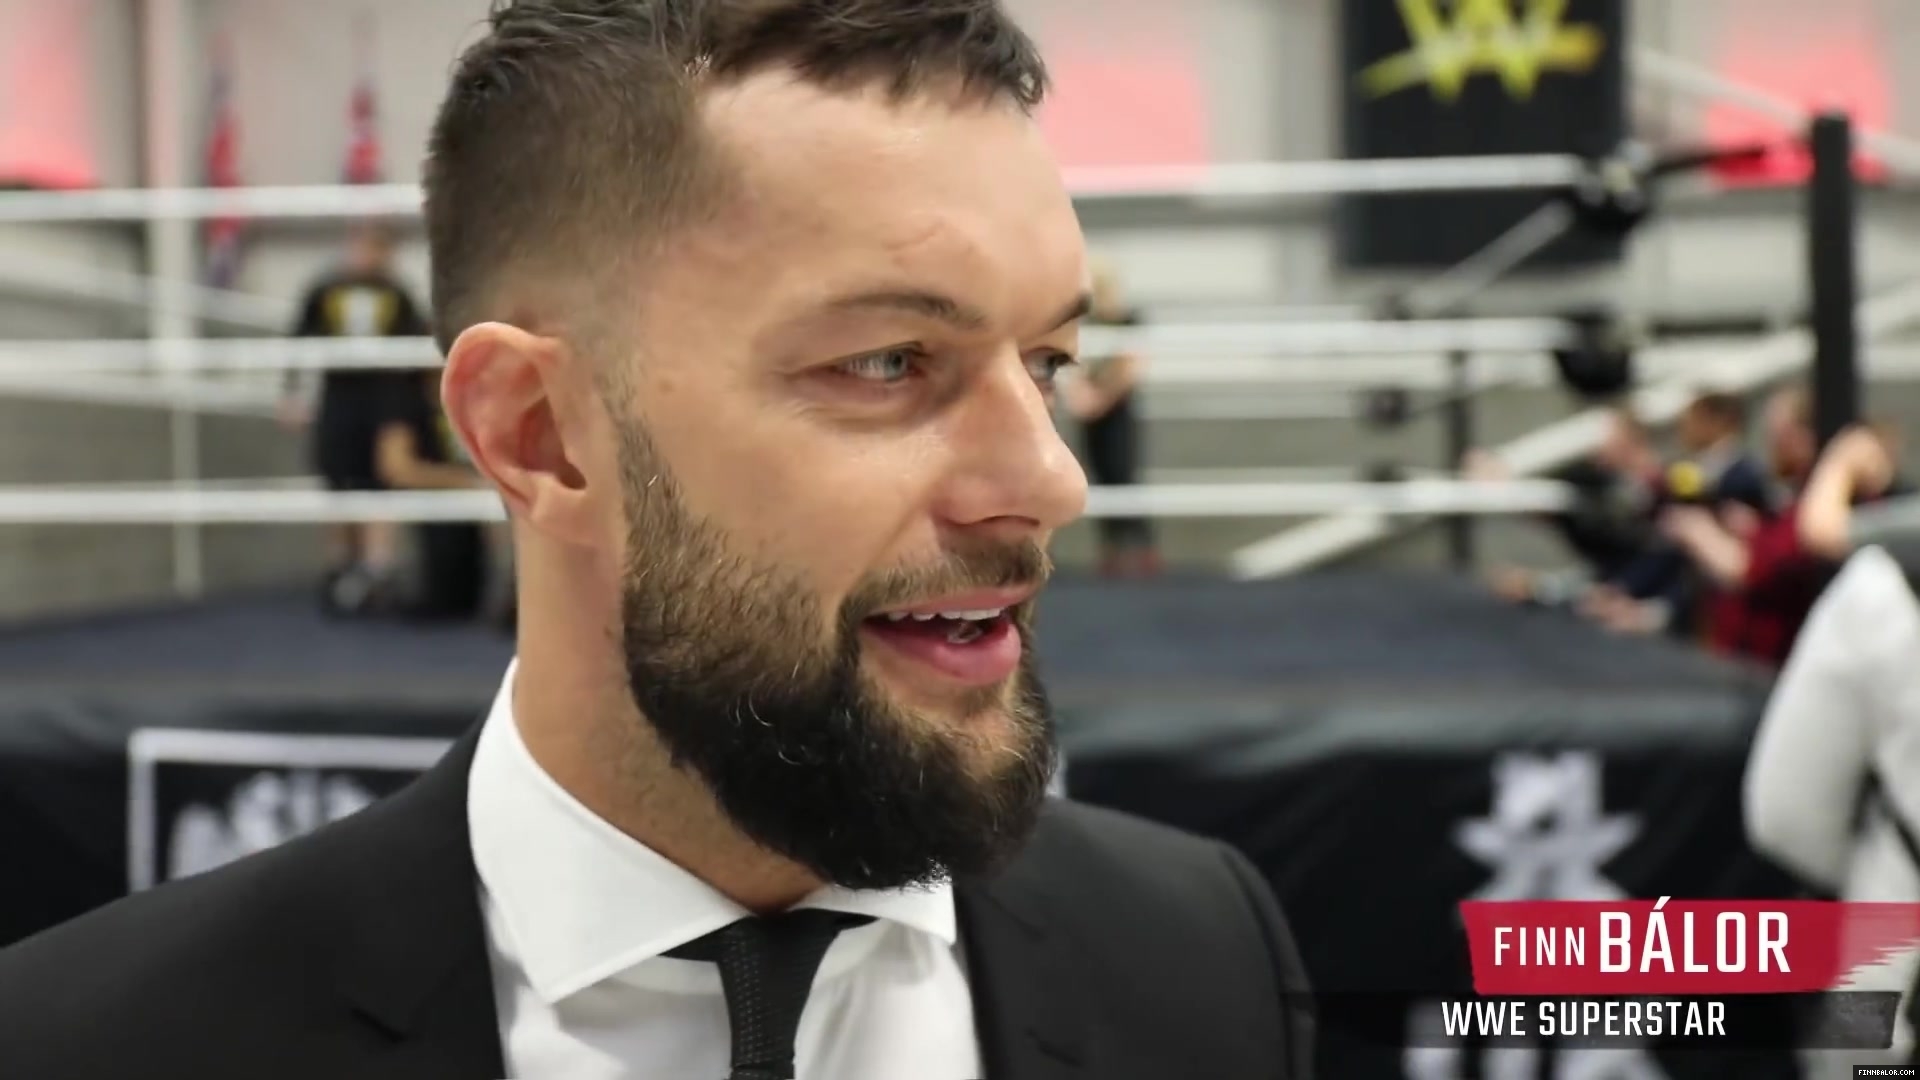 WWE_Superstar_FINN_BALOR_joins_MOUSTACHE_MOUNTAIN_at_the_opening_of_the_NXT_UK_PC_057.jpg